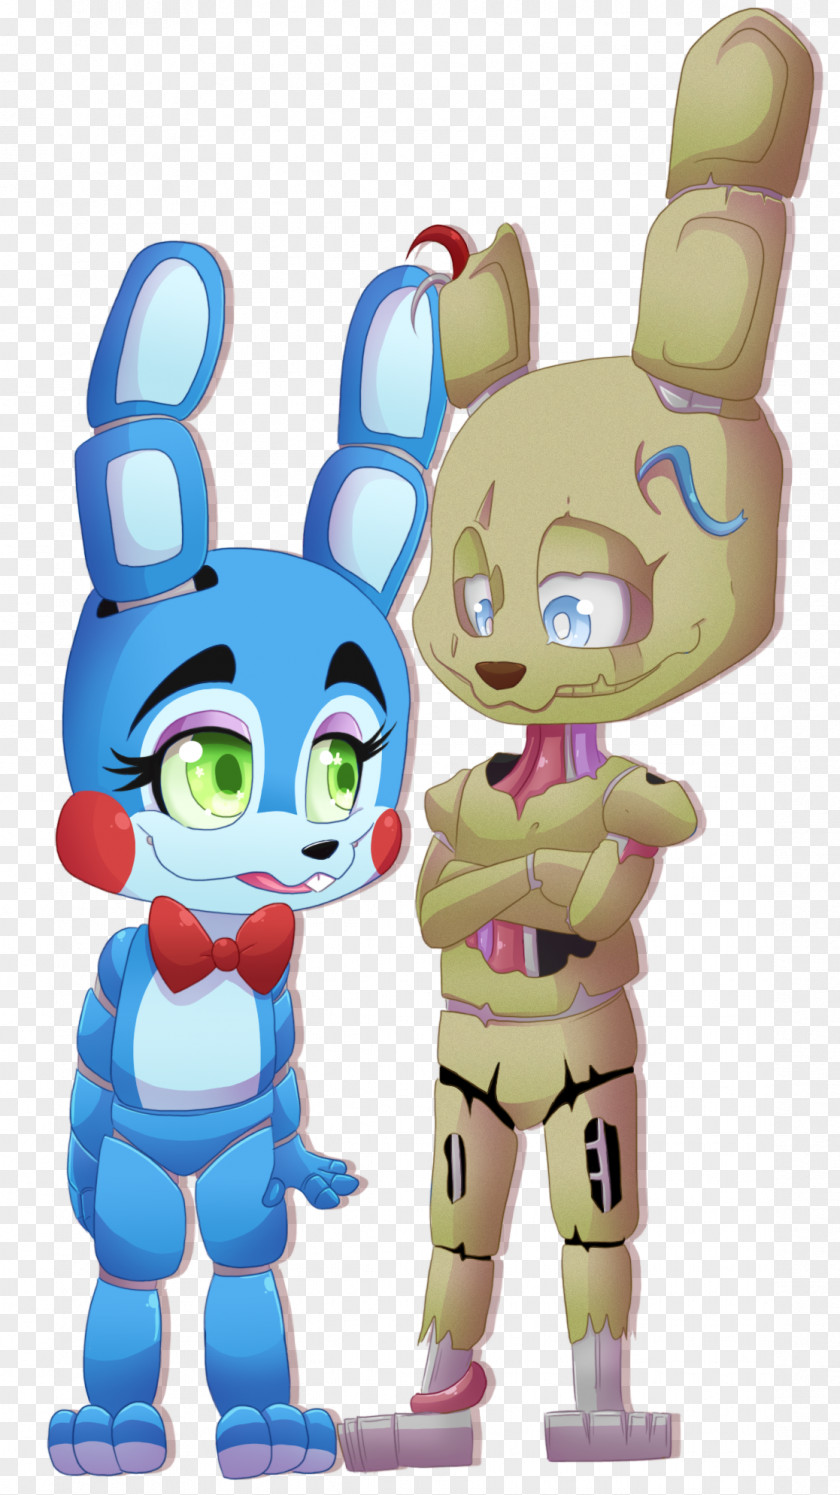 Bonnie And Toy Stuffed Animals & Cuddly Toys Five Nights At Freddy's Easter Bunny Doll PNG